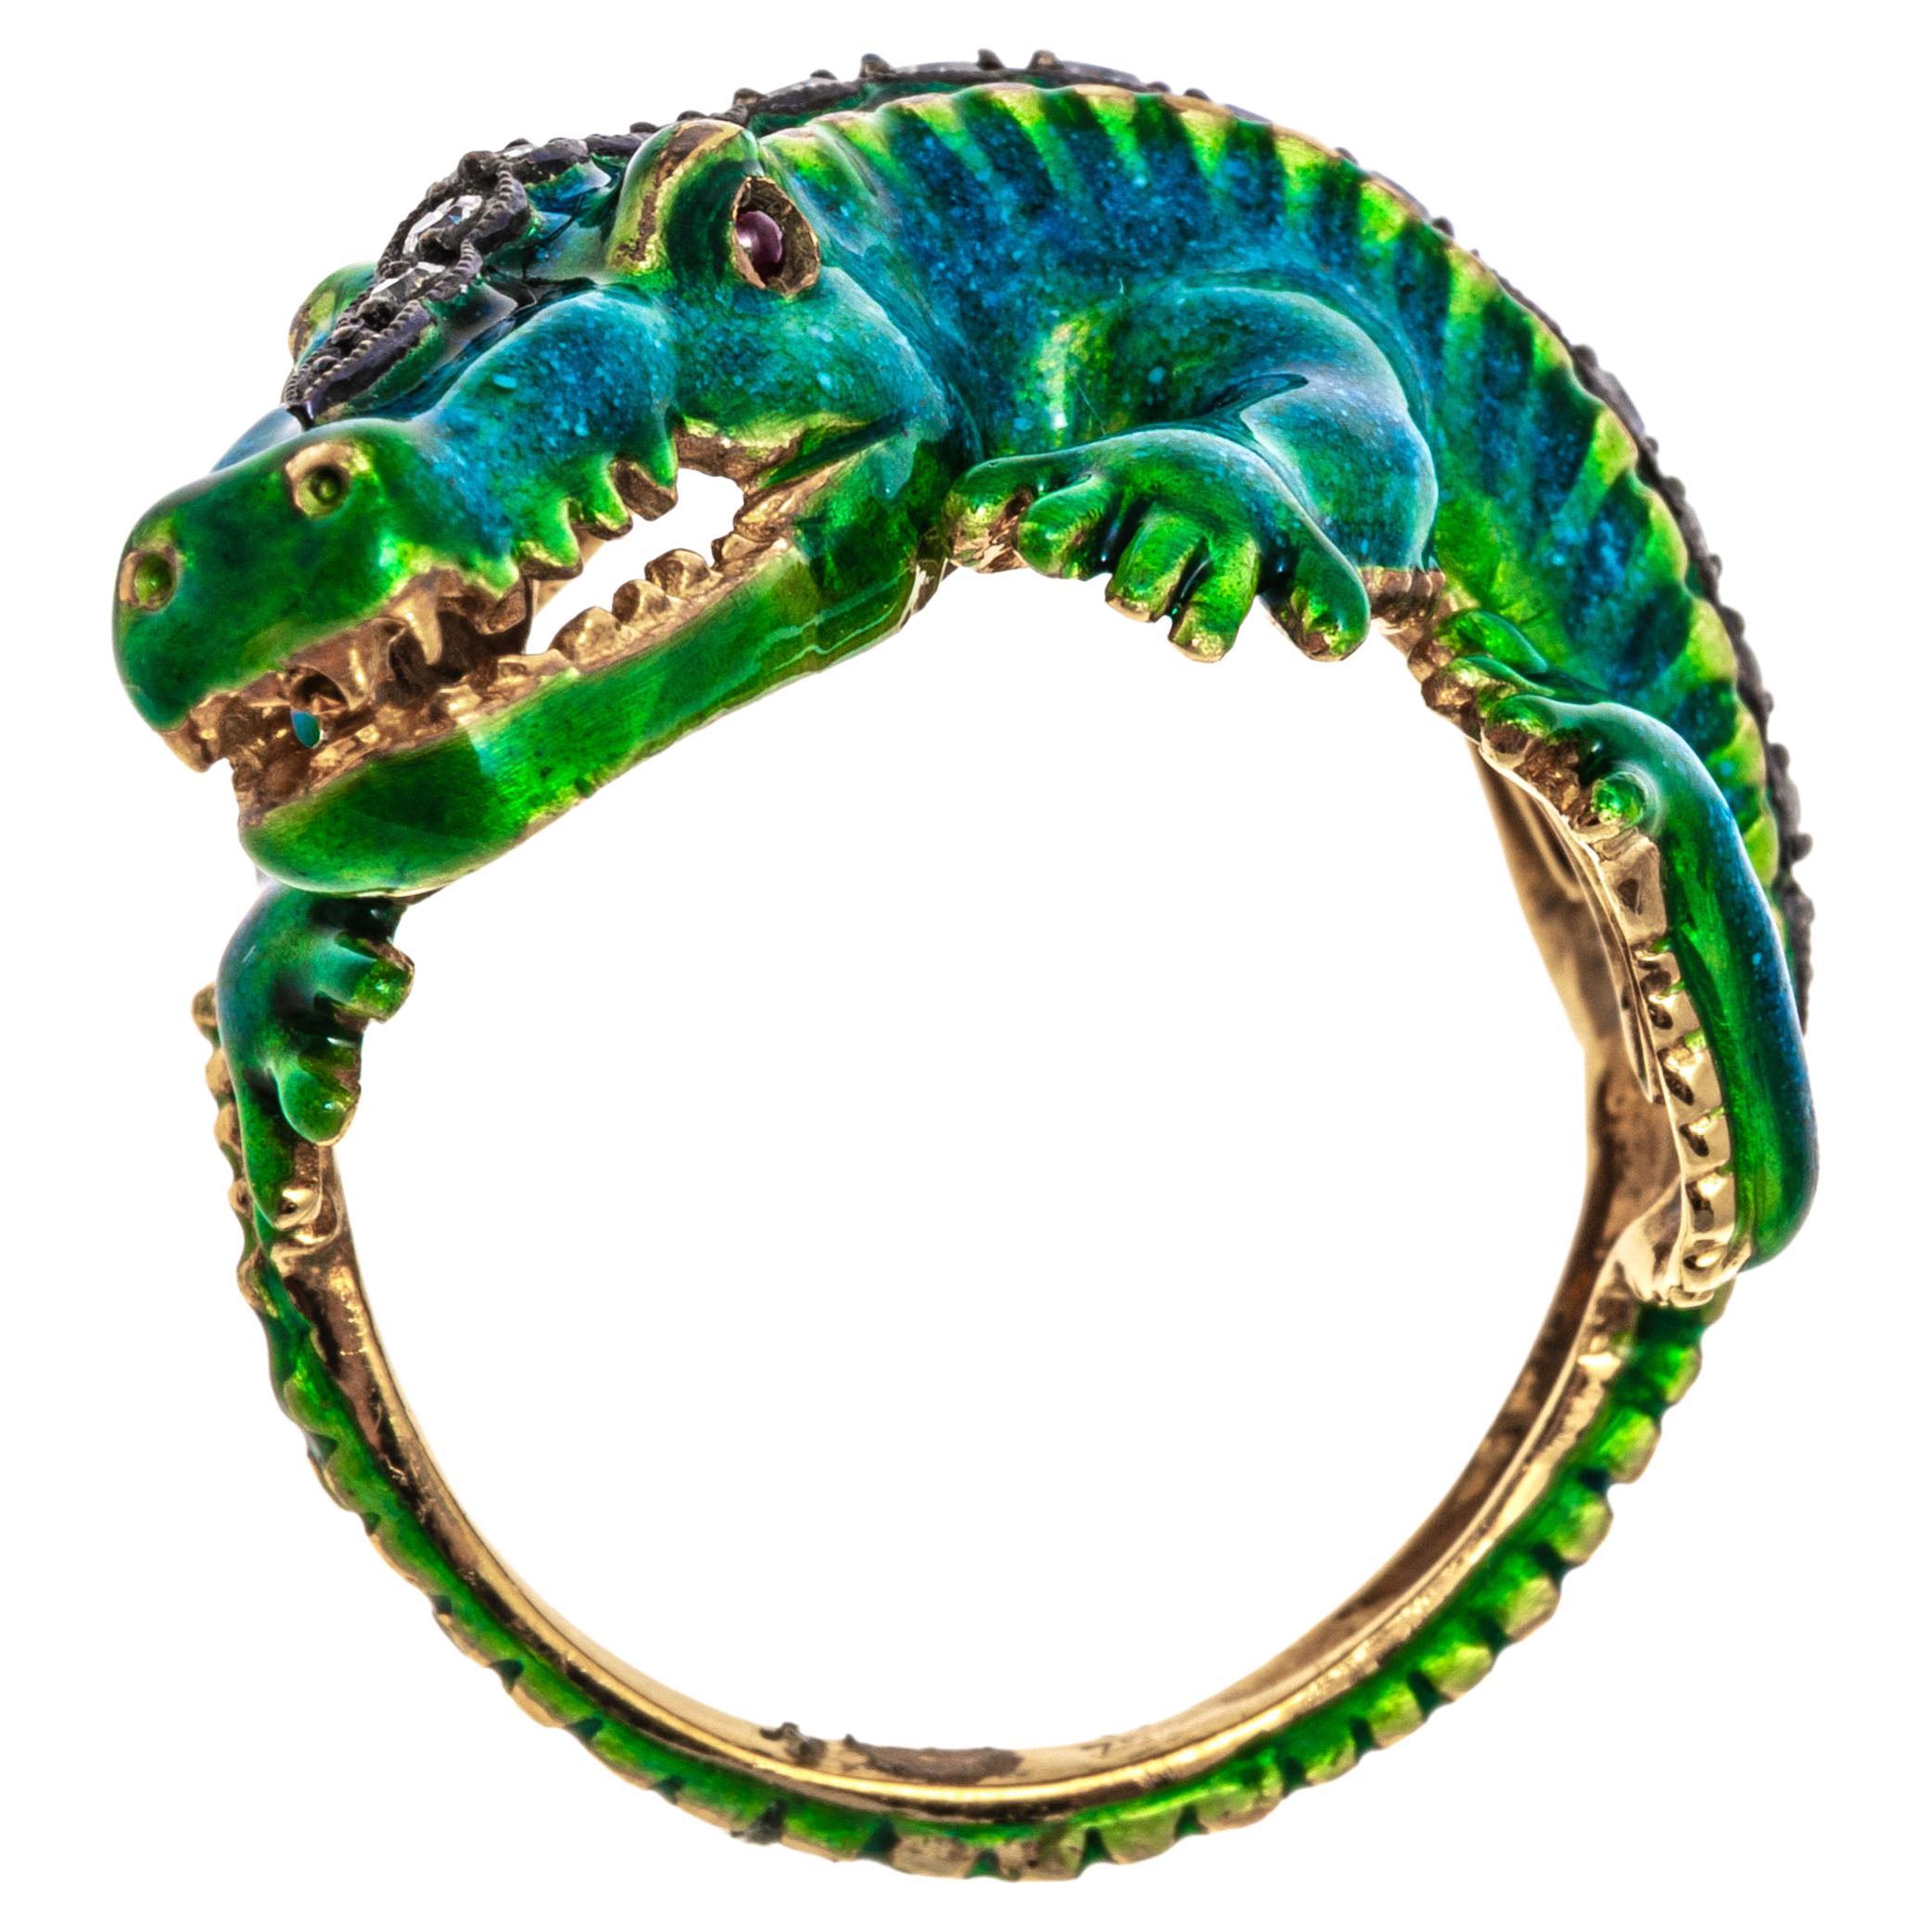 18k yellow gold ring. This stunning ring is a figural alligator, set with a green and greenish blue color field of enamel, and set down the back with graduated round faceted diamonds, prong set, approximately 0.22 TCW. The alligator is also